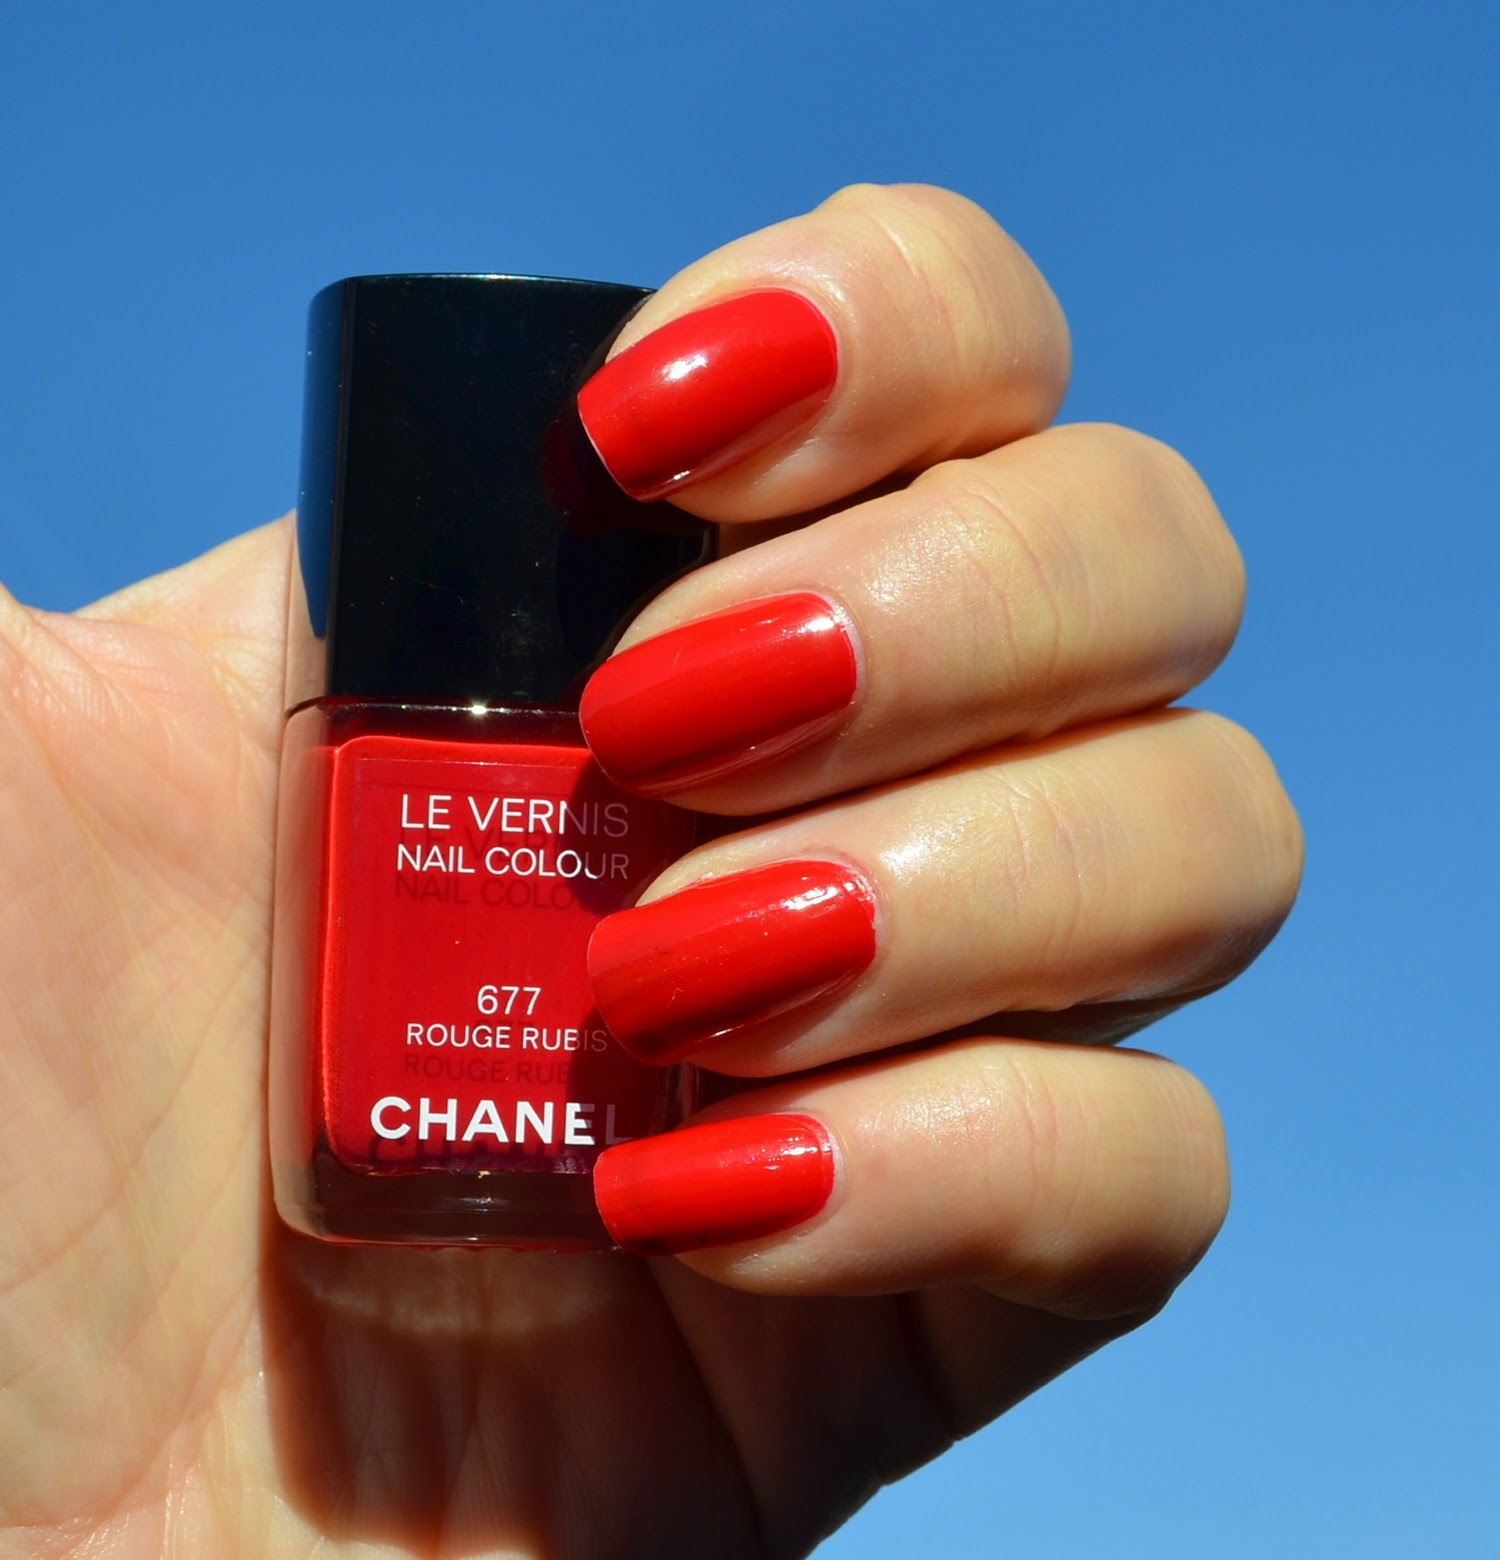 Chanel Le Vernis #677 Rouge Rubis from Nuit Infinie de Chanel